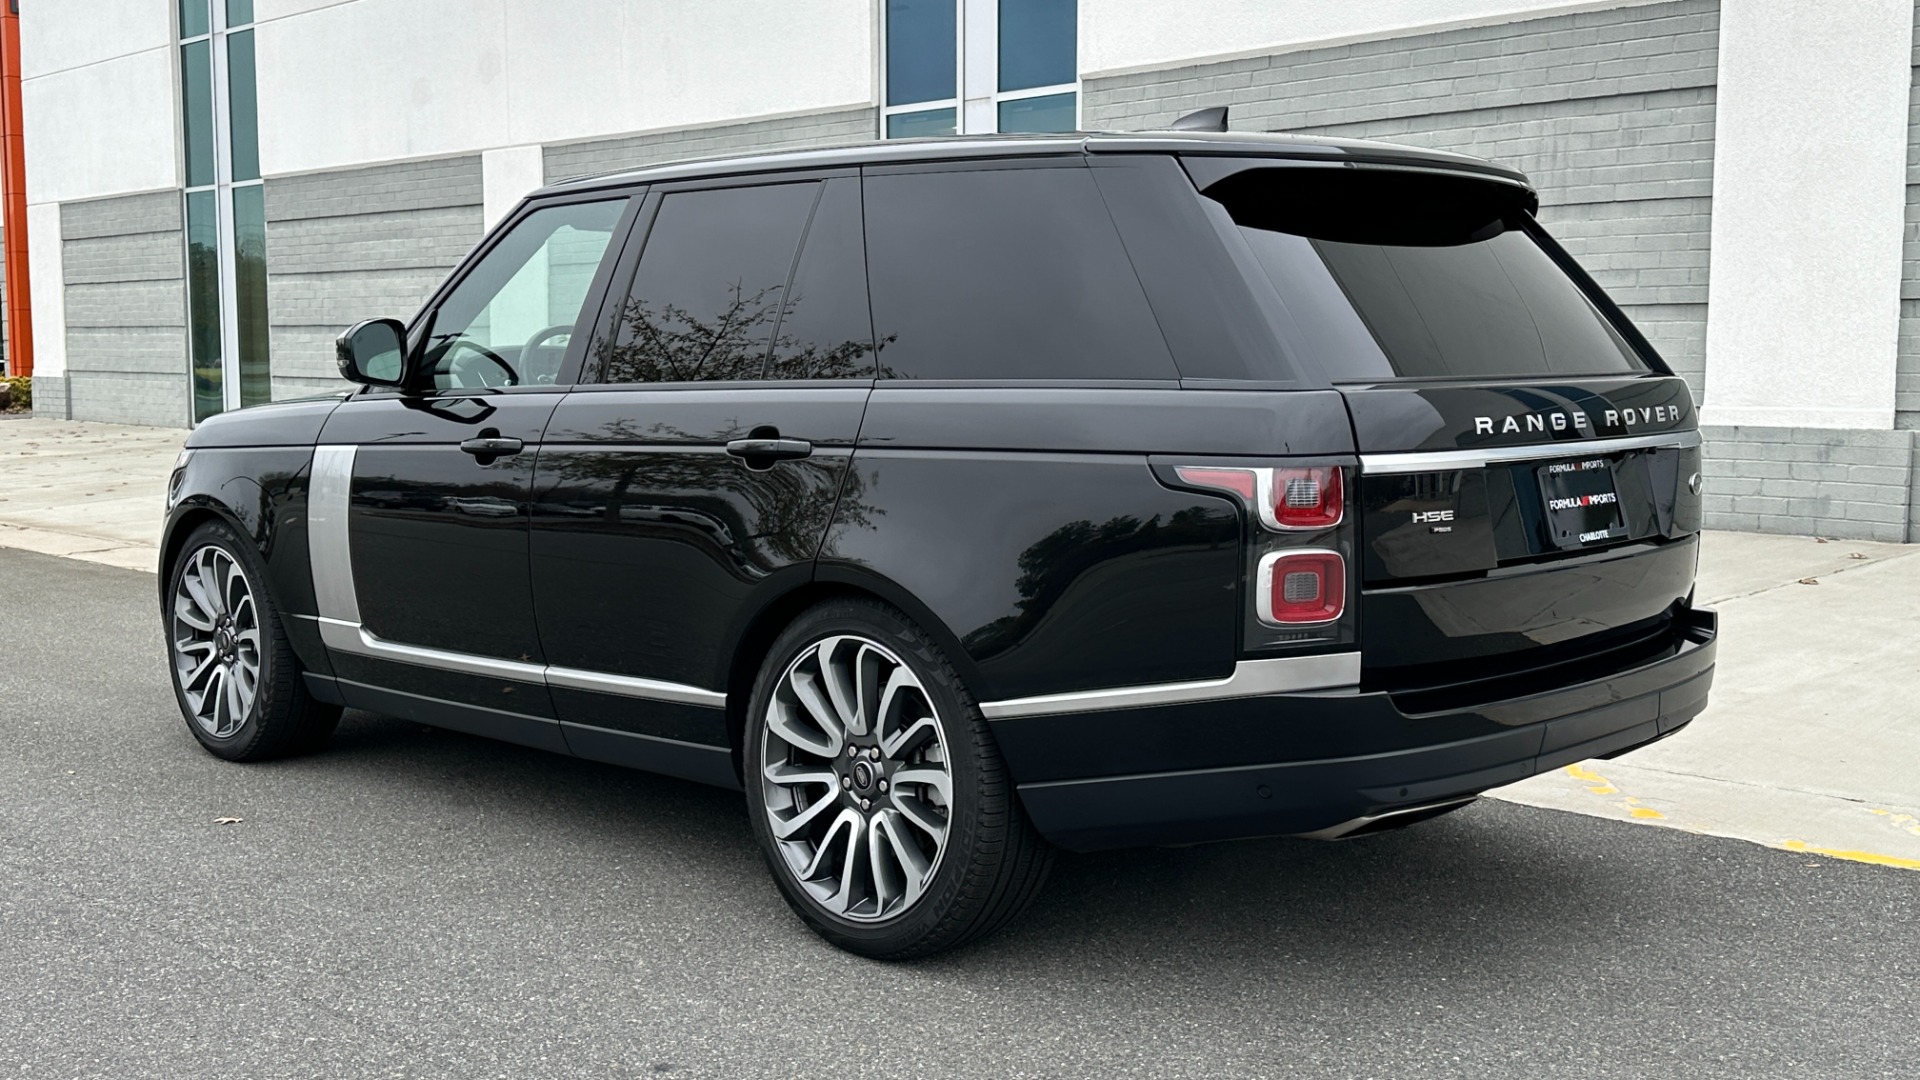 Used 2020 Land Rover Range Rover P525 HSE / DRIVE PRO PACK / 22IN WHEELS / MERIDIAN SOUND / REAR CONVENIENCE for sale $72,000 at Formula Imports in Charlotte NC 28227 4